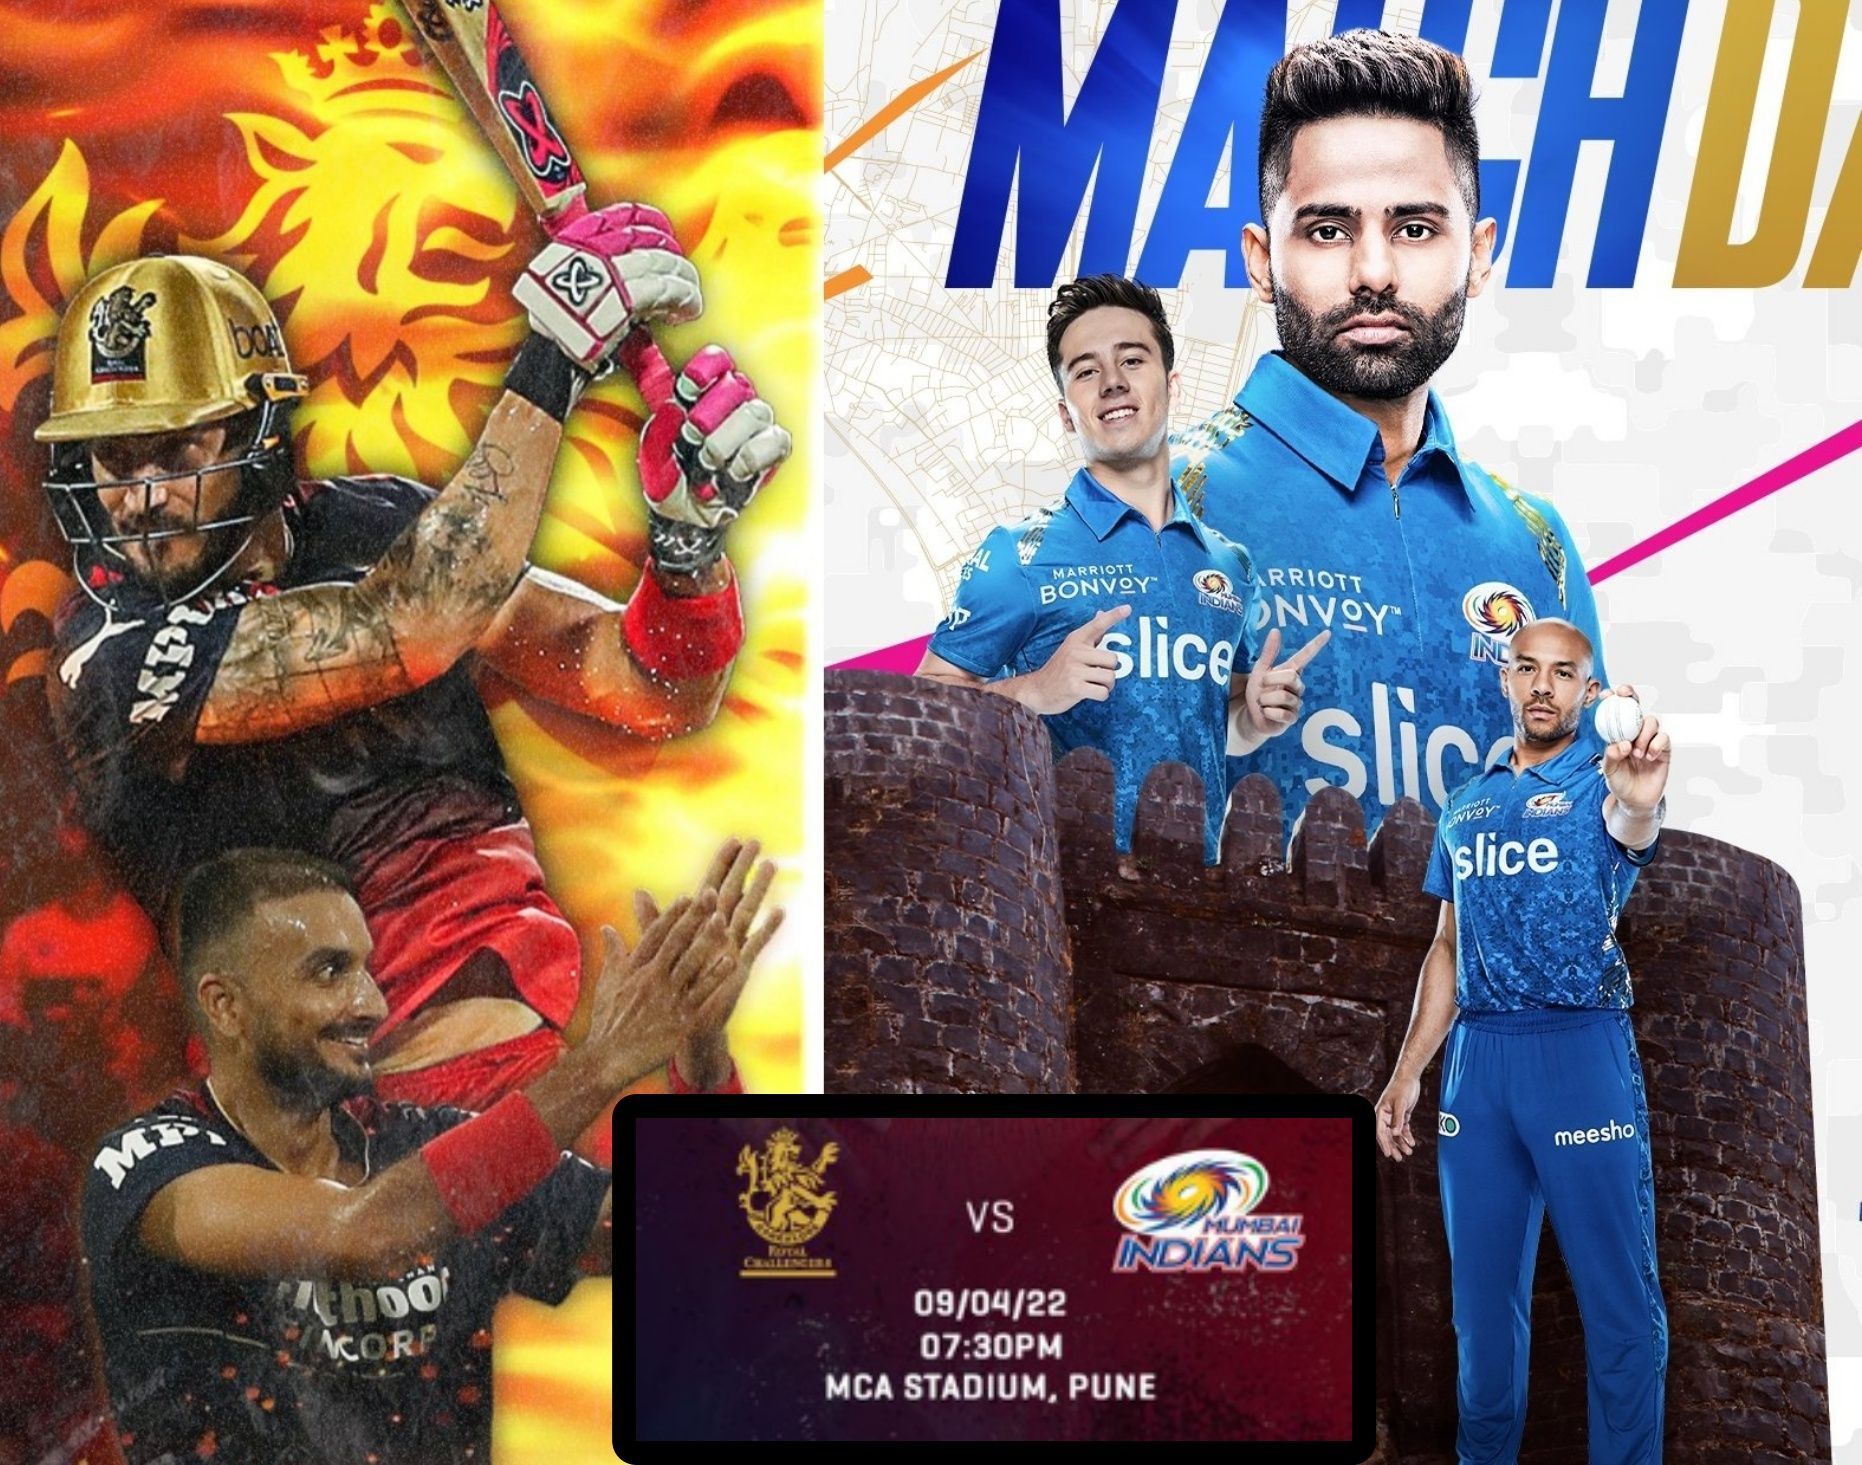 The Royal Challengers Bangalore are taking on the Mumbai Indians in Pune. Pics: RCB/ MI